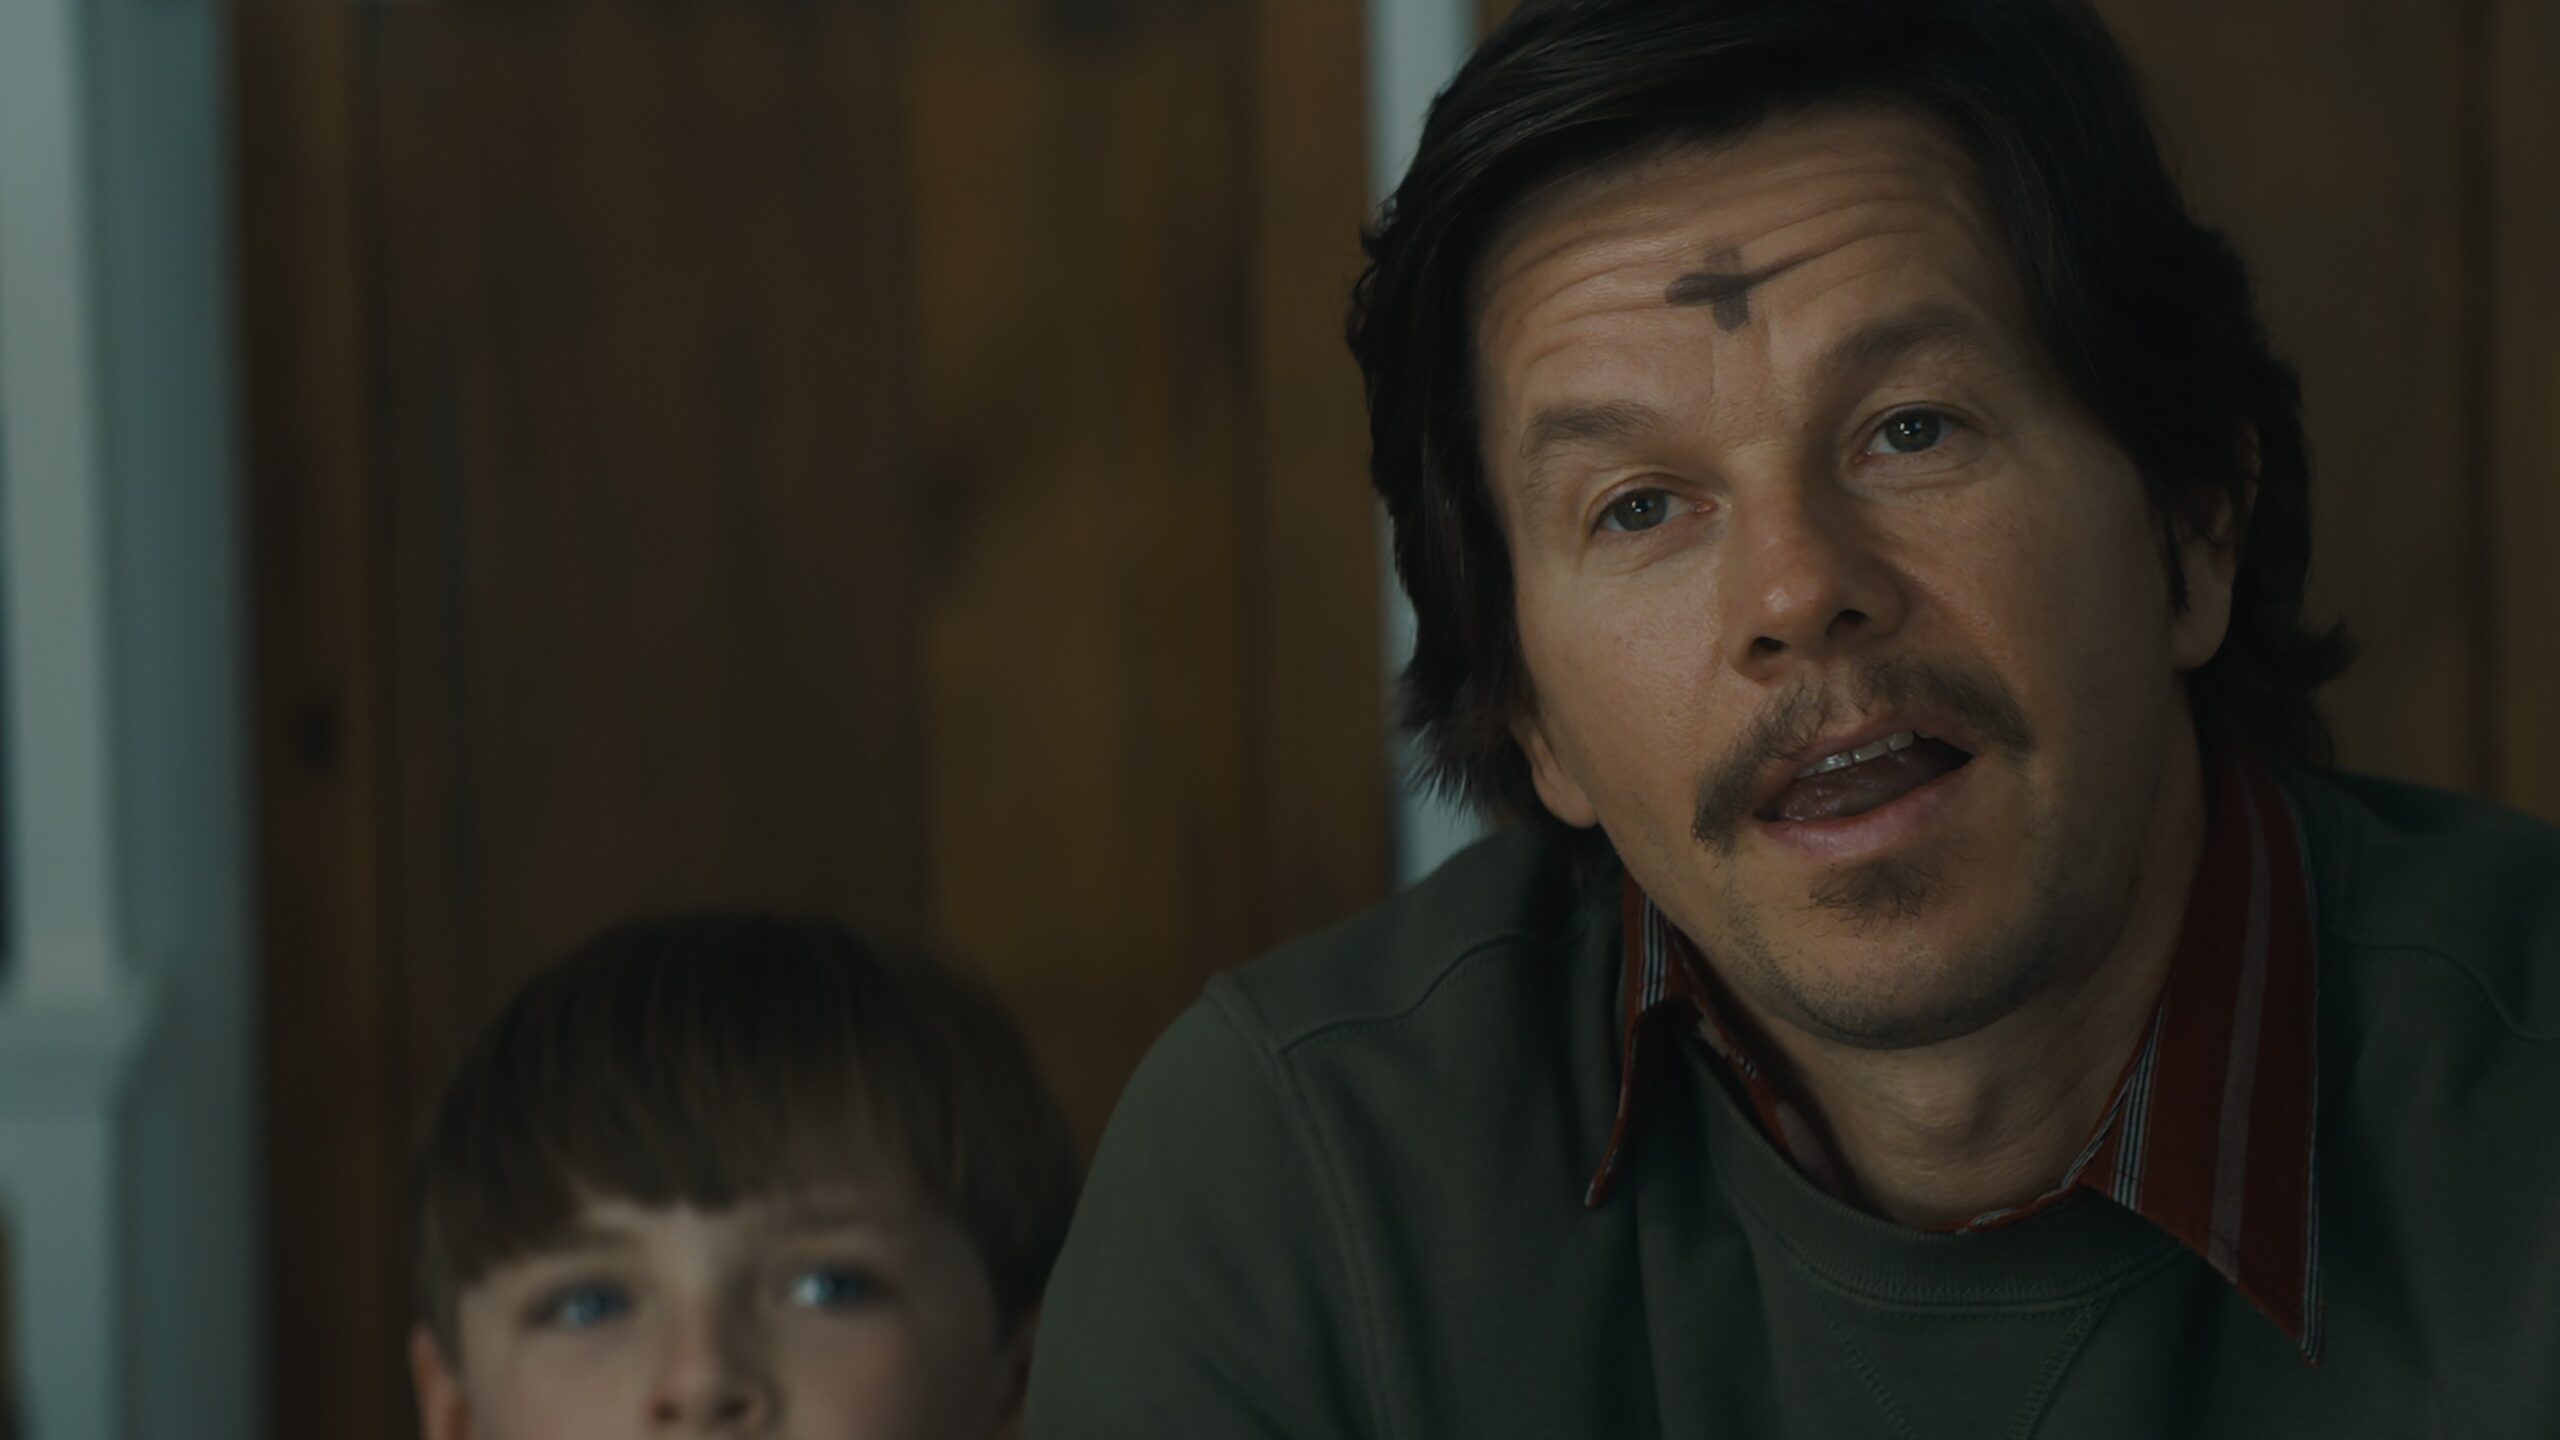 Father Stu movie, Mark Wahlberg's role, Unconventional priest, Intriguing dialogues, 2560x1440 HD Desktop